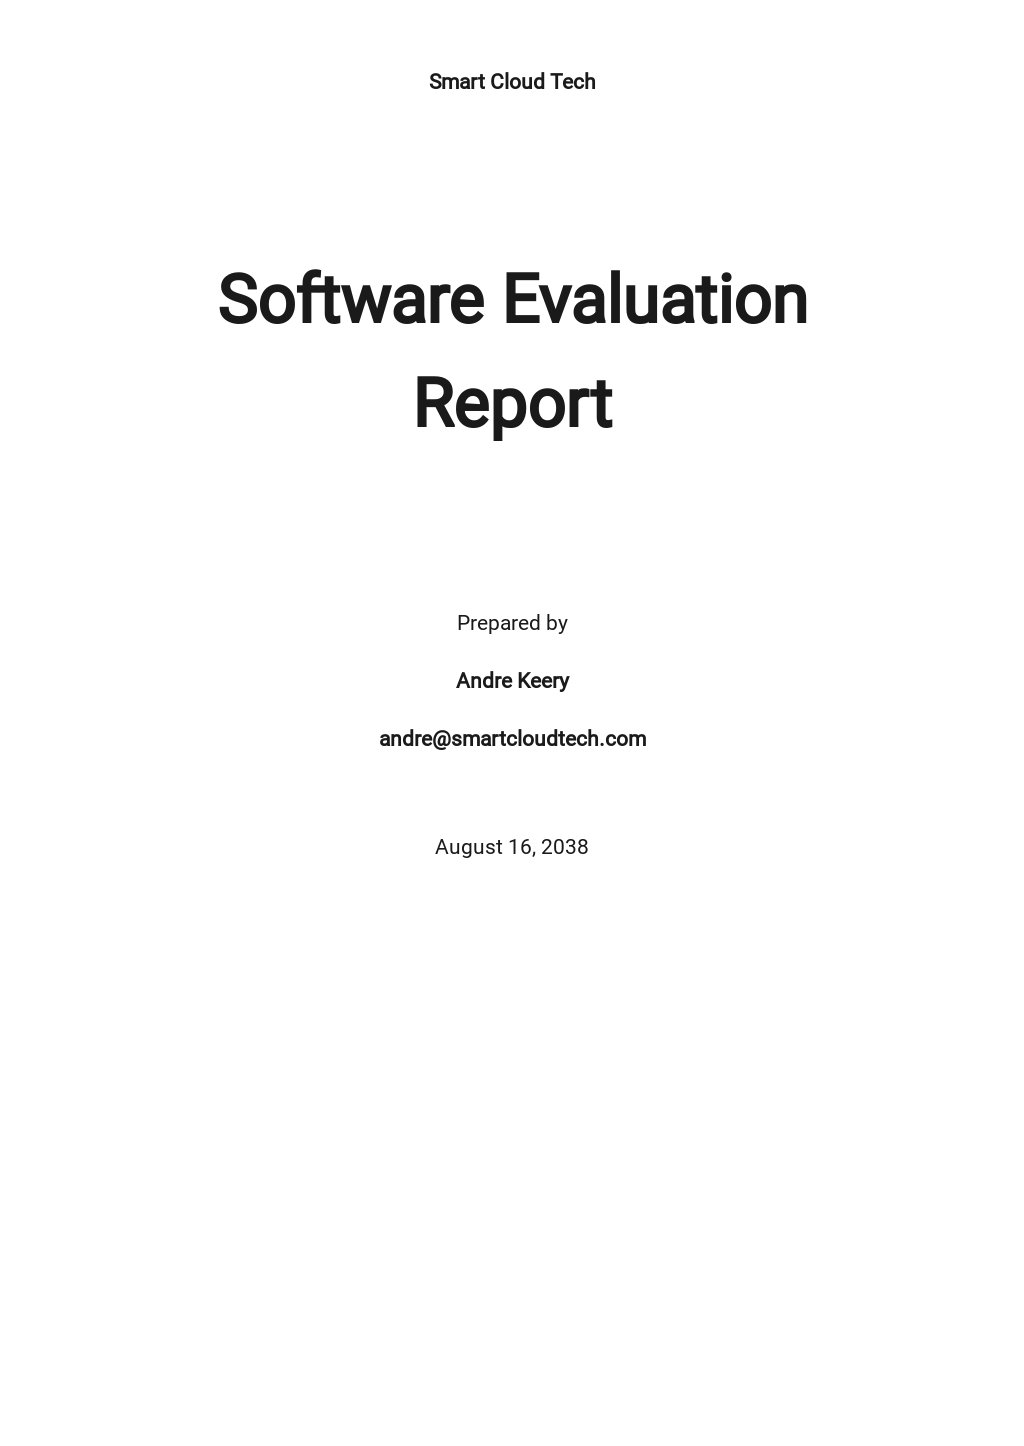 Software Evaluation Report Template Google Docs, Word